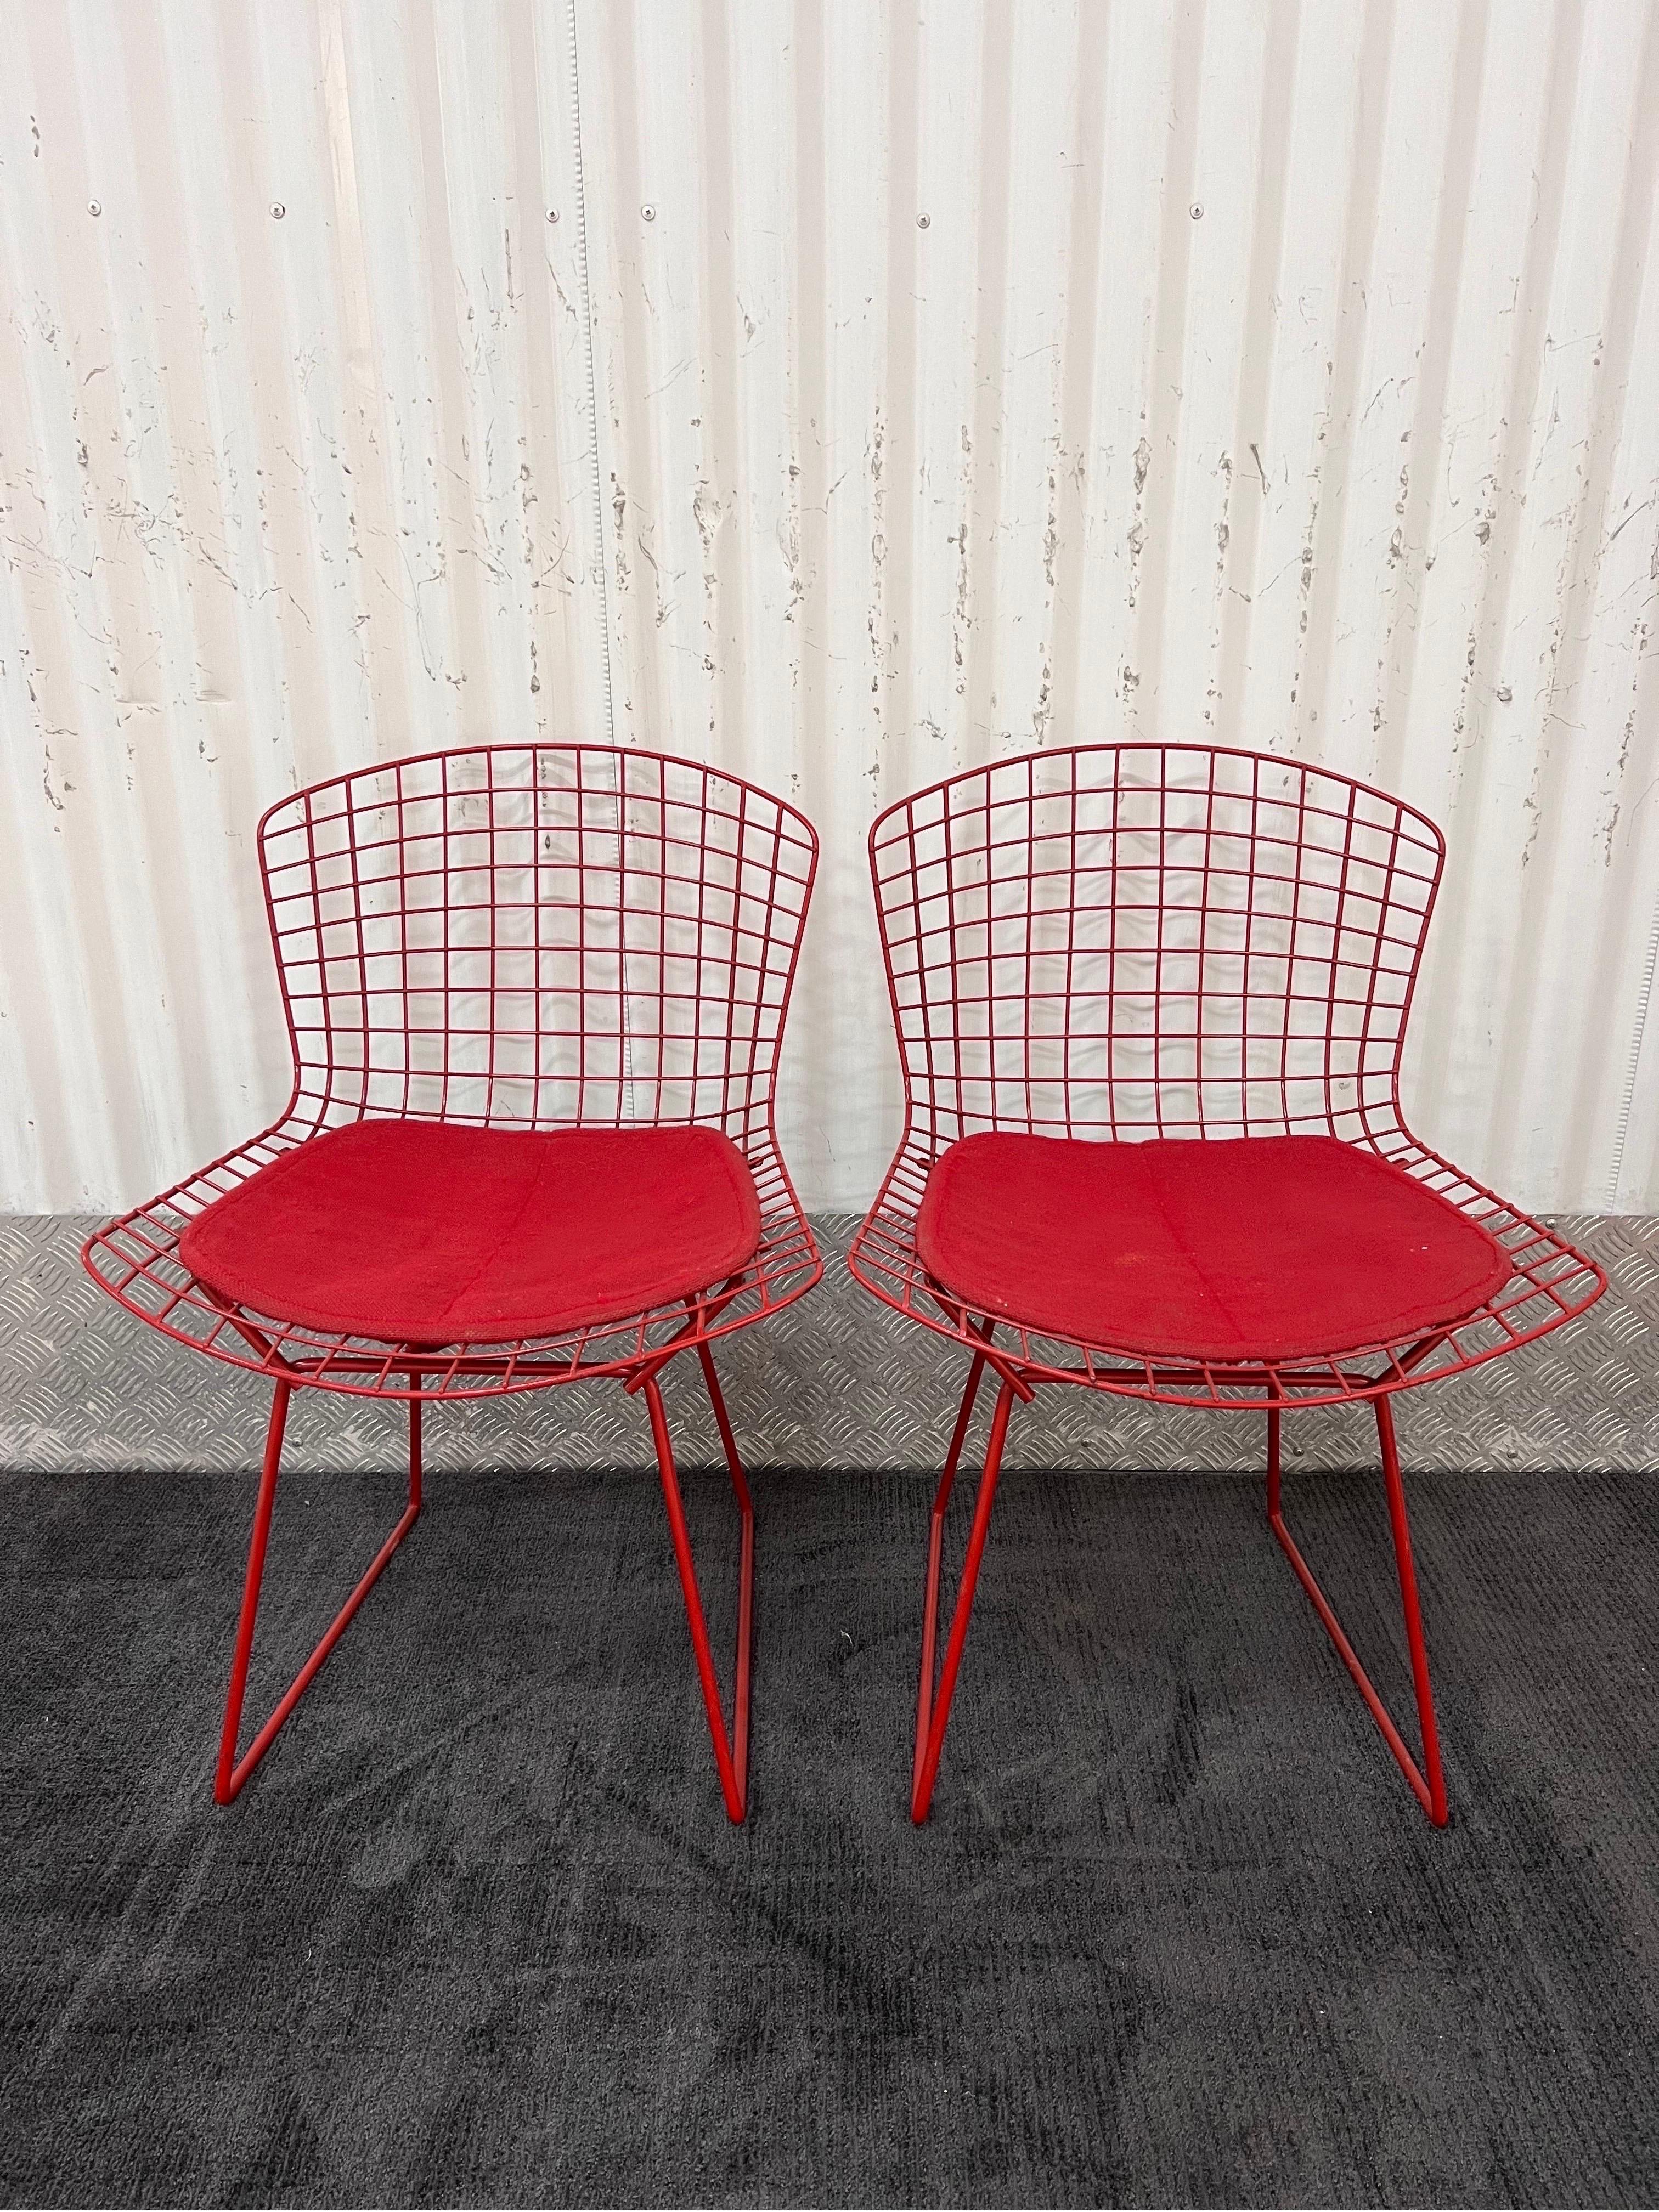 Pair of red enameled wire side chairs by Harry Bertoia and produced by Forma Brazil for Knoll, 1980s.